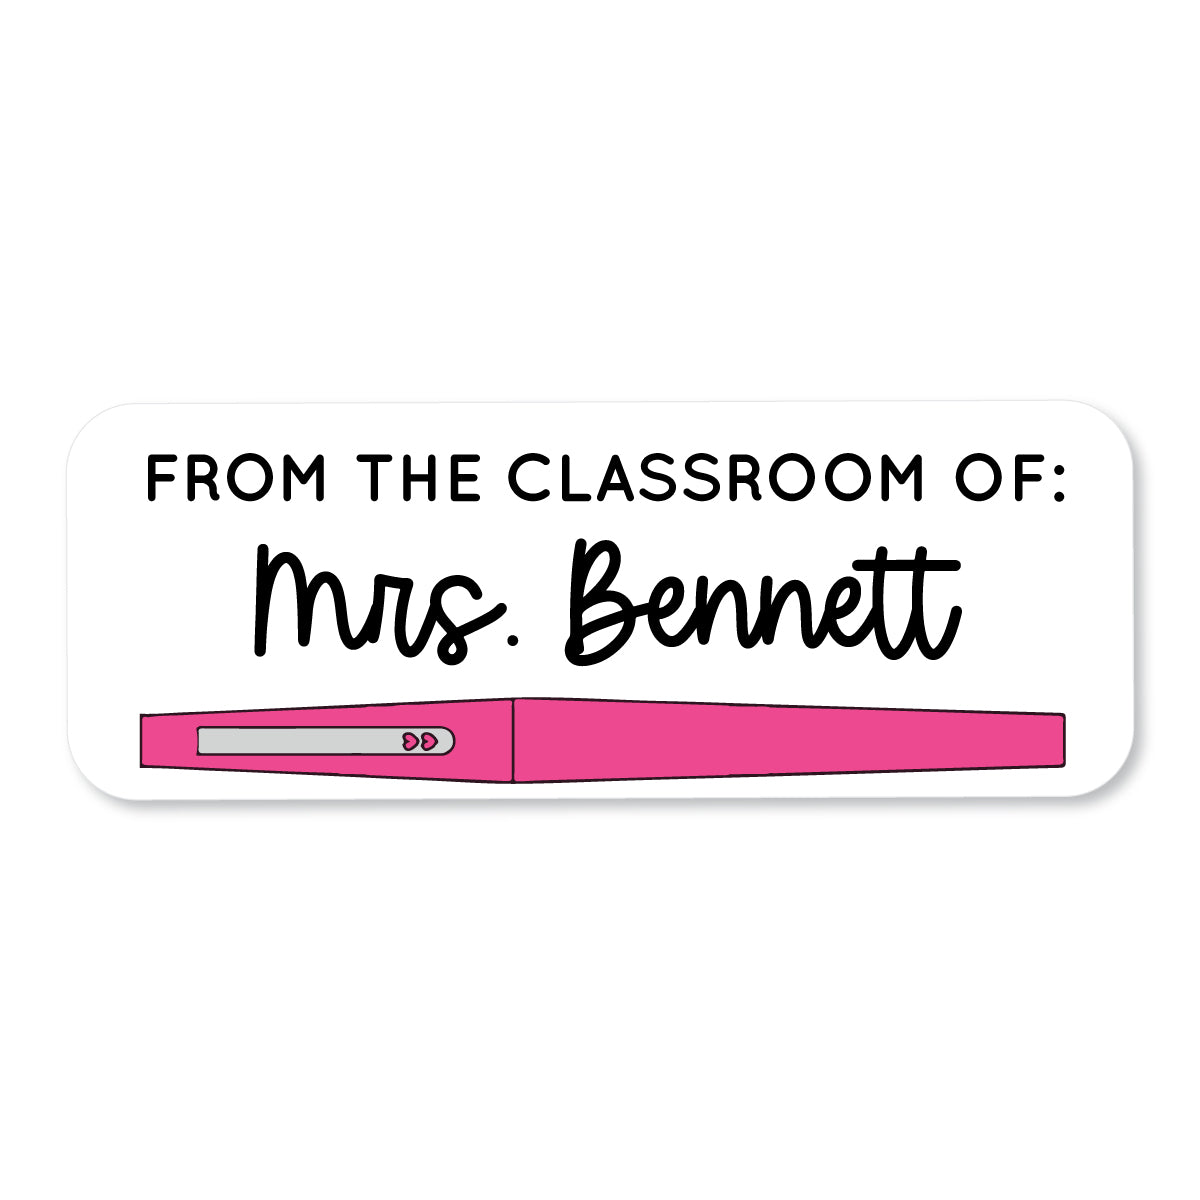 Flair Pen Pink Teacher School Label – A Touch of Whimsy Designs